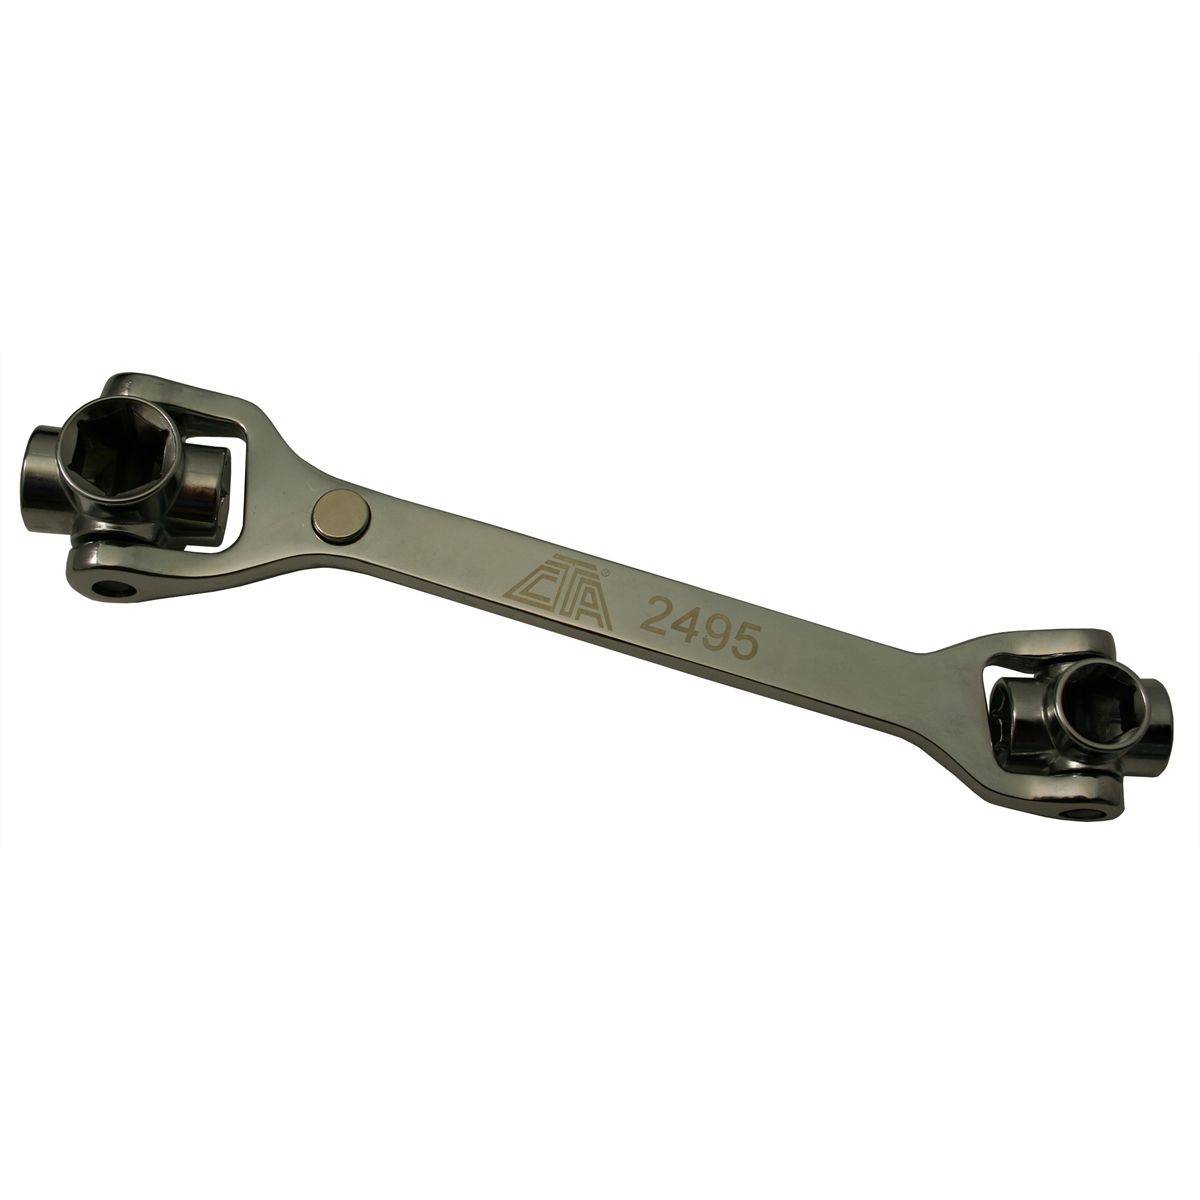 8-1 Multi Wrench 12-19mm Hex-Box